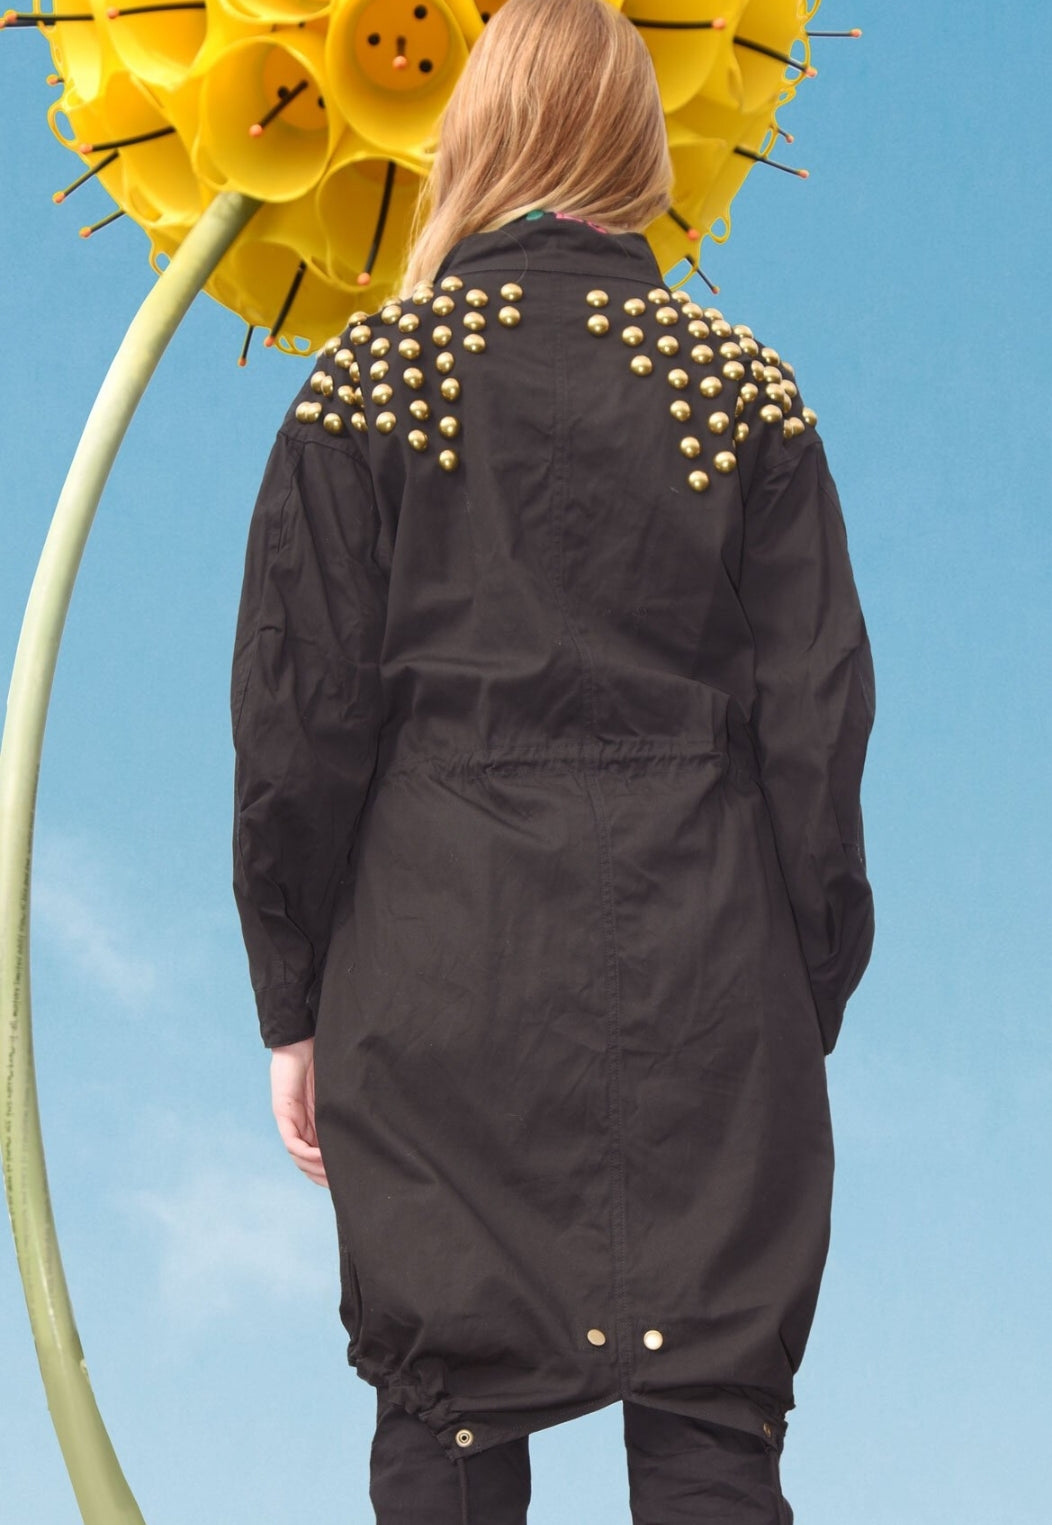 Curate game of domes coat